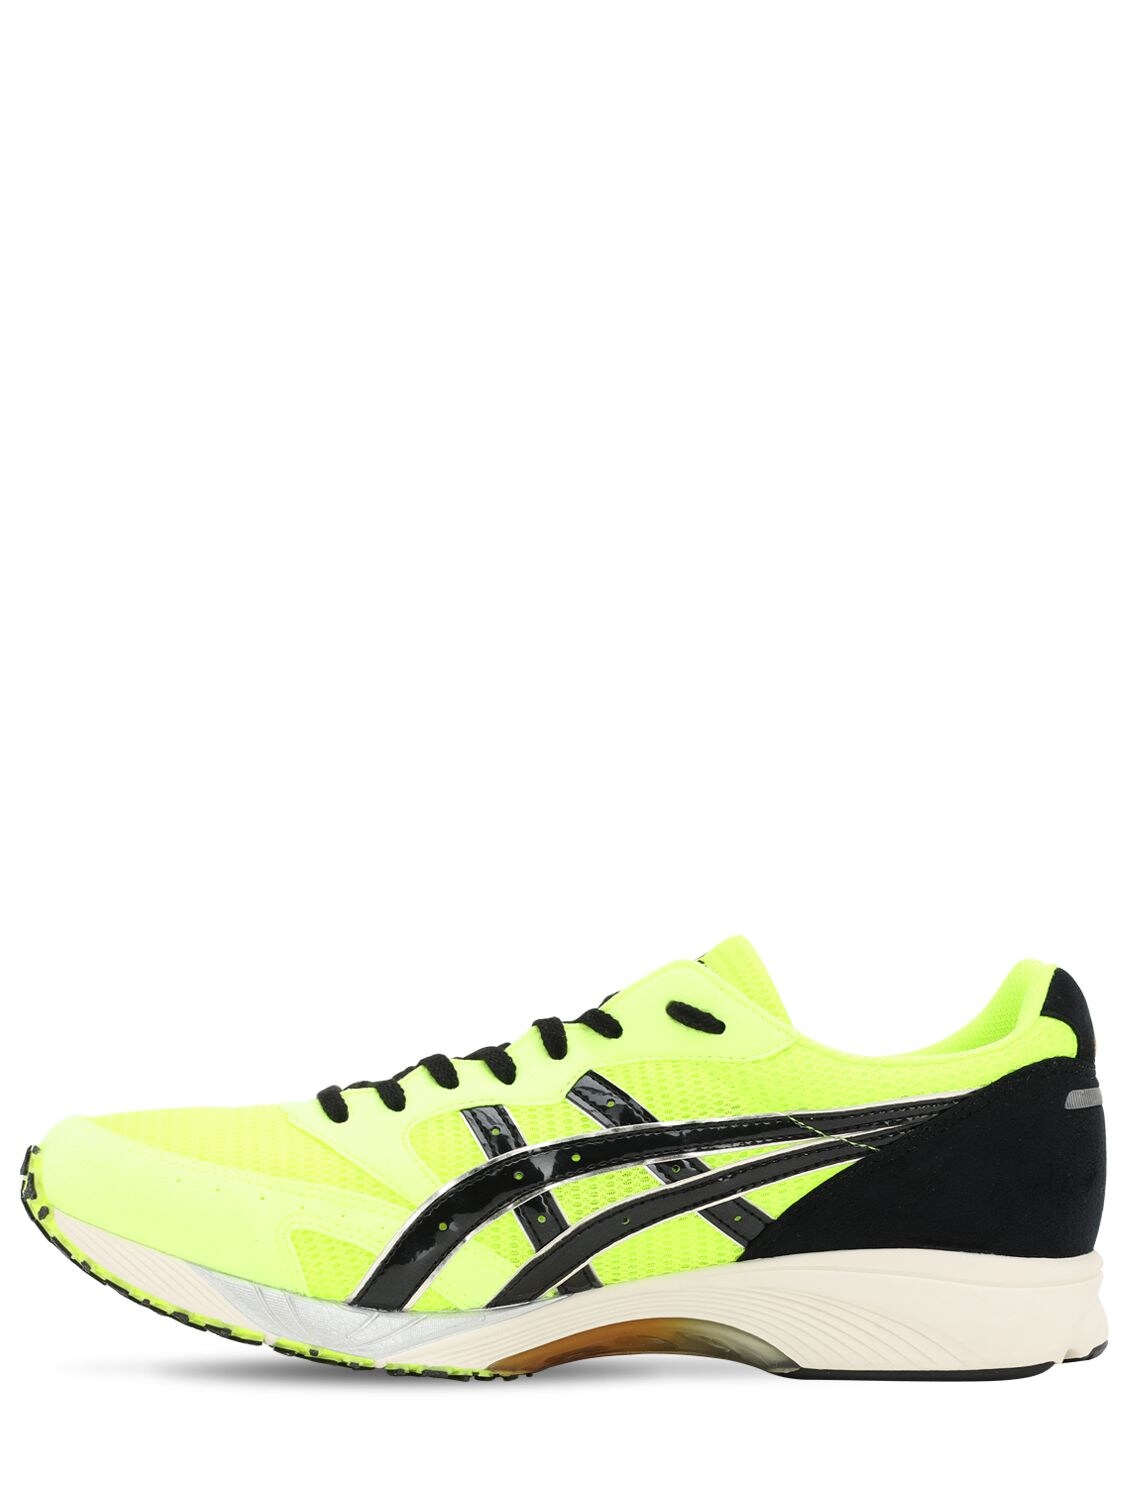 7.5 Yellow in Green for Men Mens Trainers Asics Trainers Save 51% Asics Tarther Japan Running Shoes 